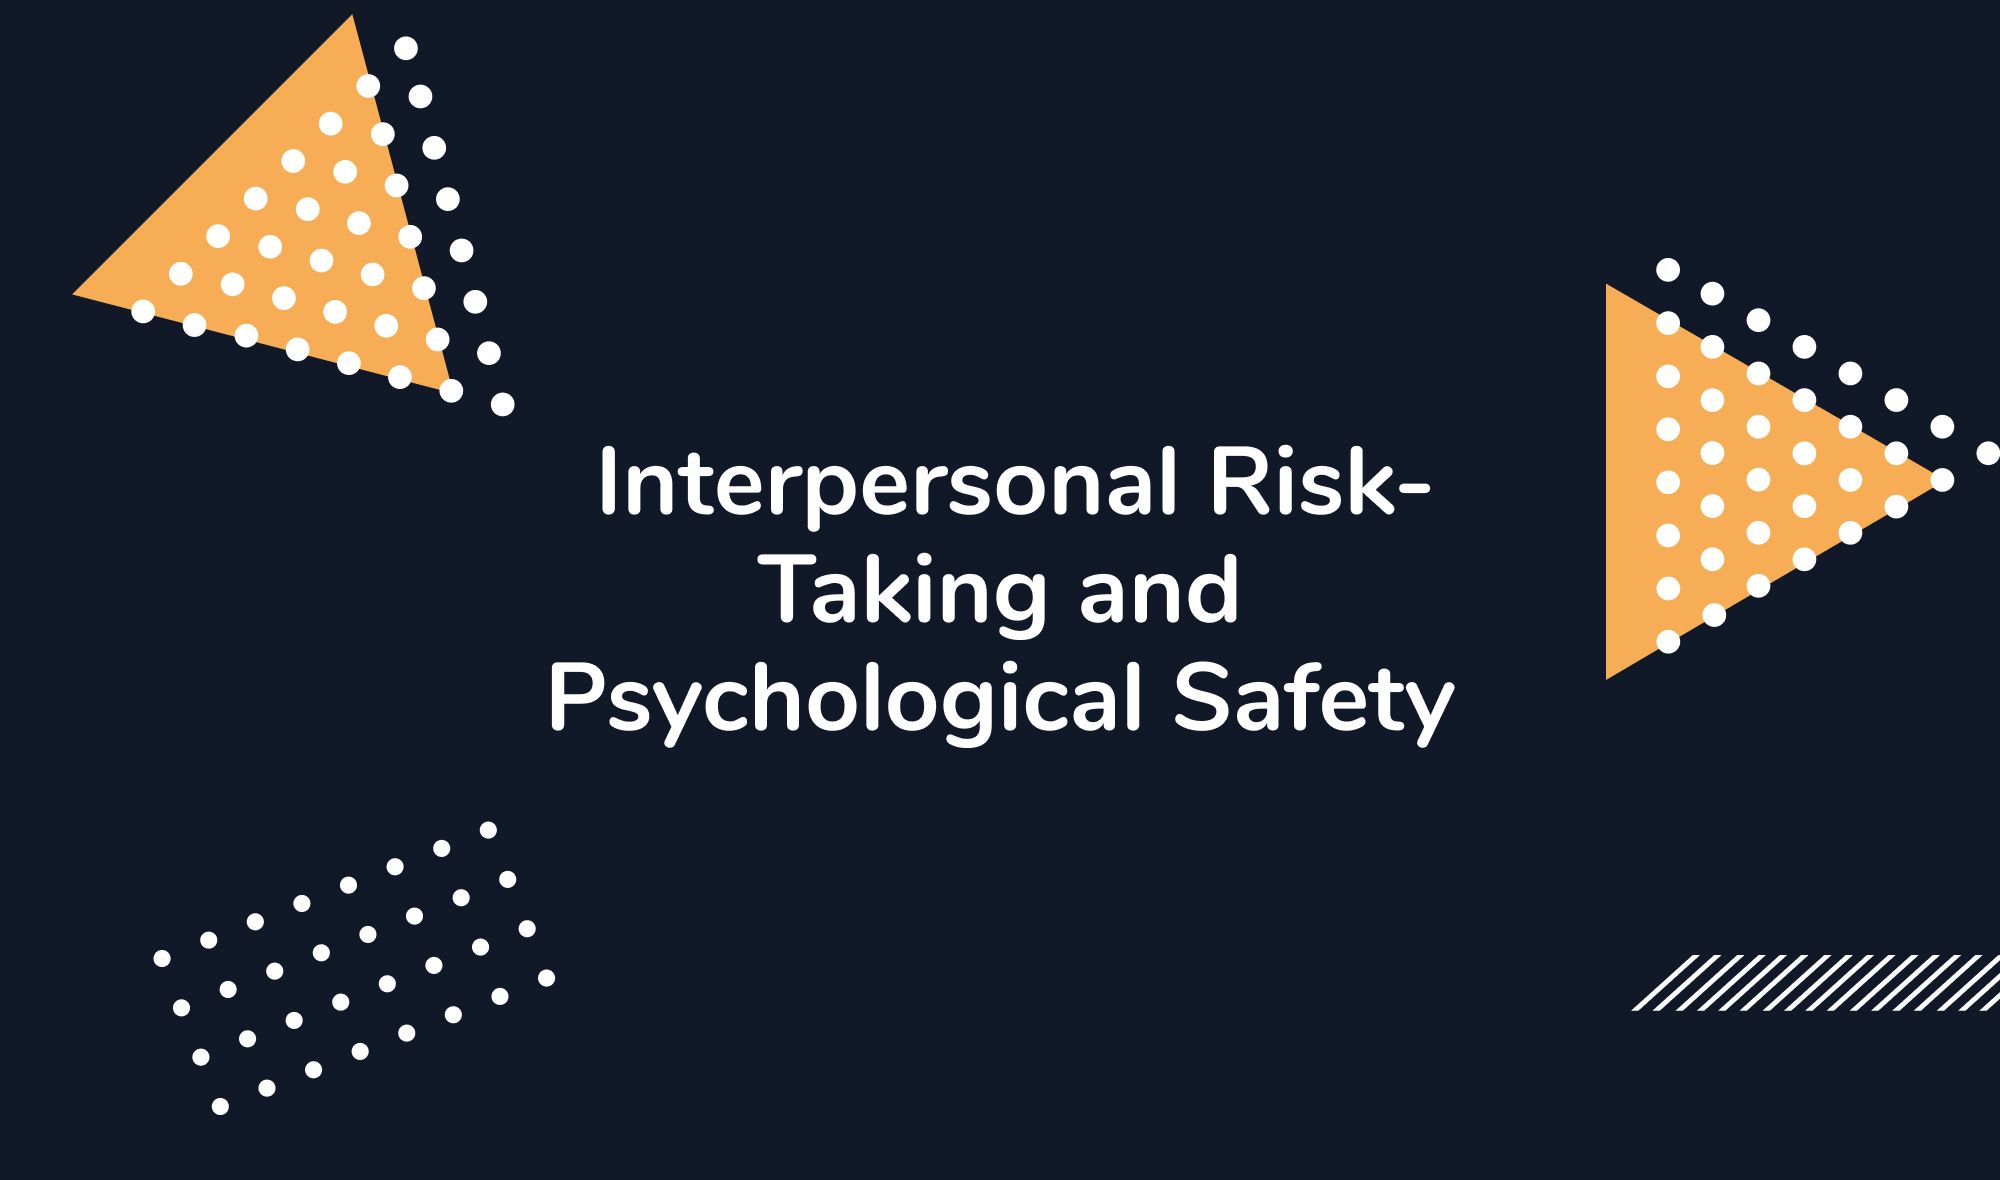 Interpersonal Risk-Taking and Psychological Safety